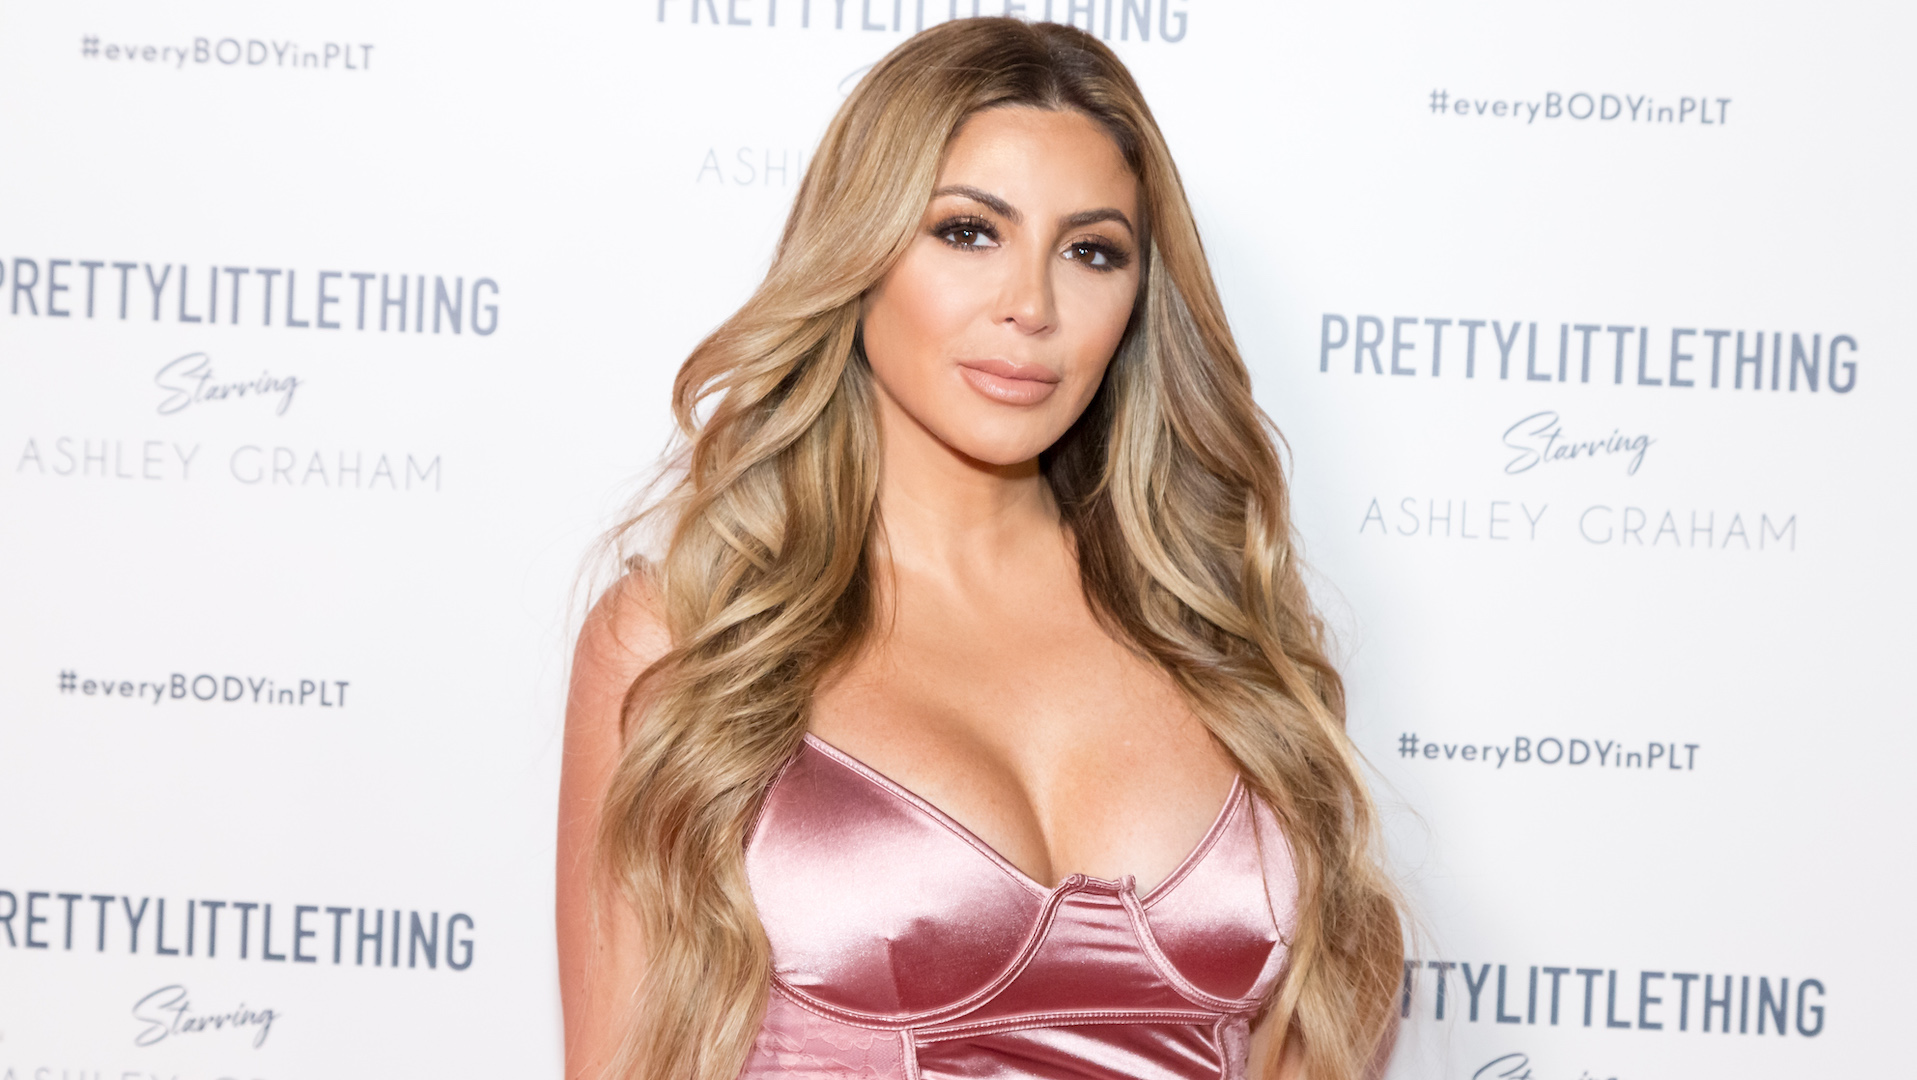 Larsa Pippen Speaks on Future’s Lyric About Her and Their Brief Romance